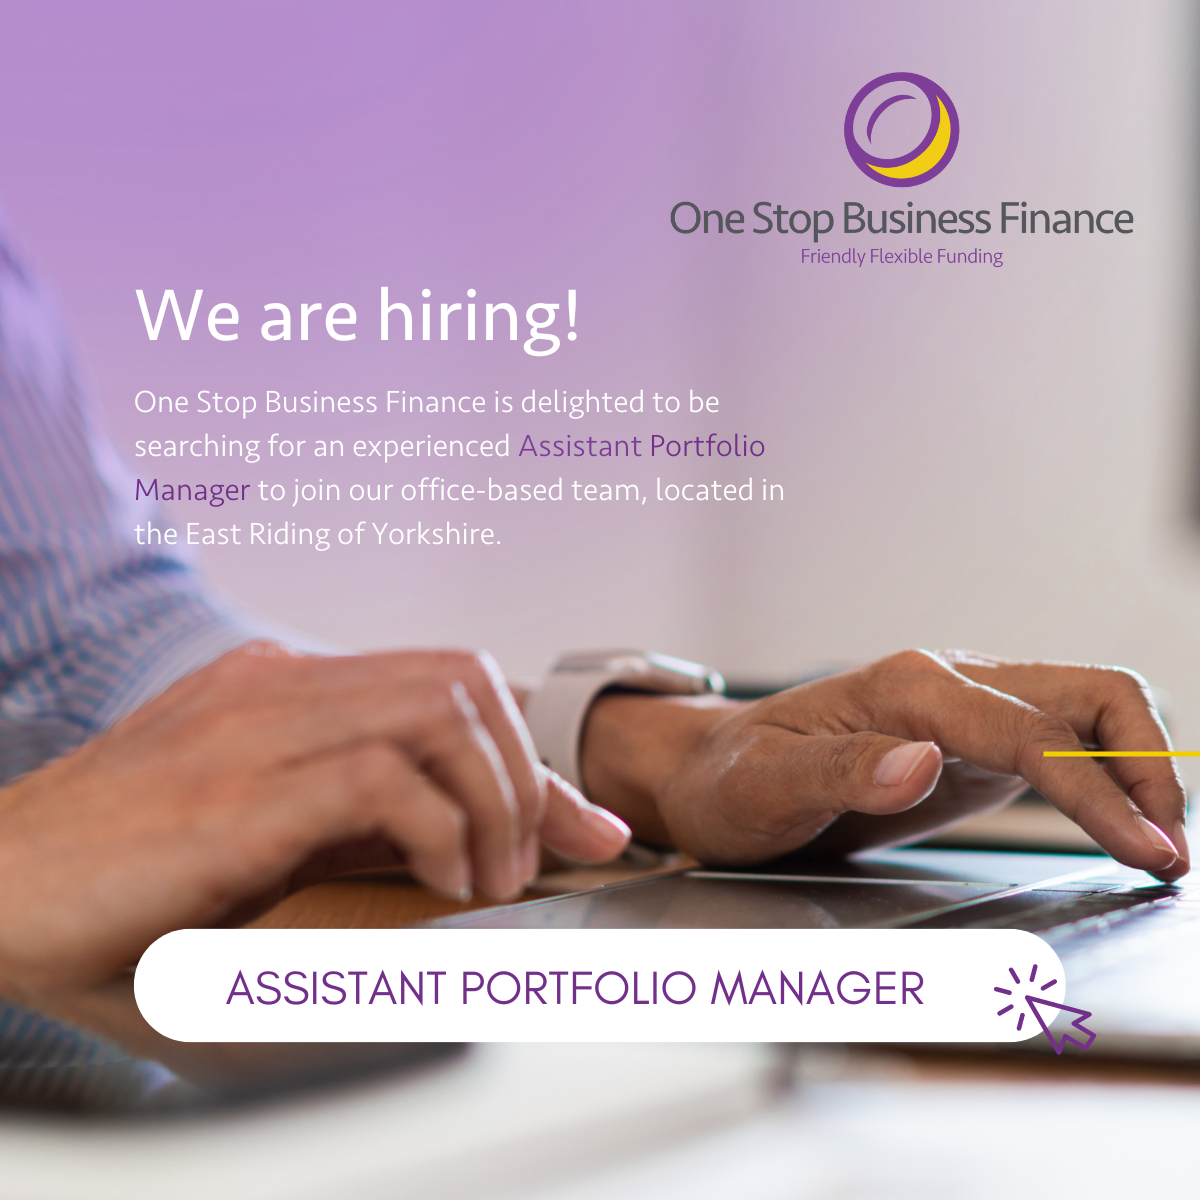 We're hiring! We're recruiting an Assistant Portfolio Manager